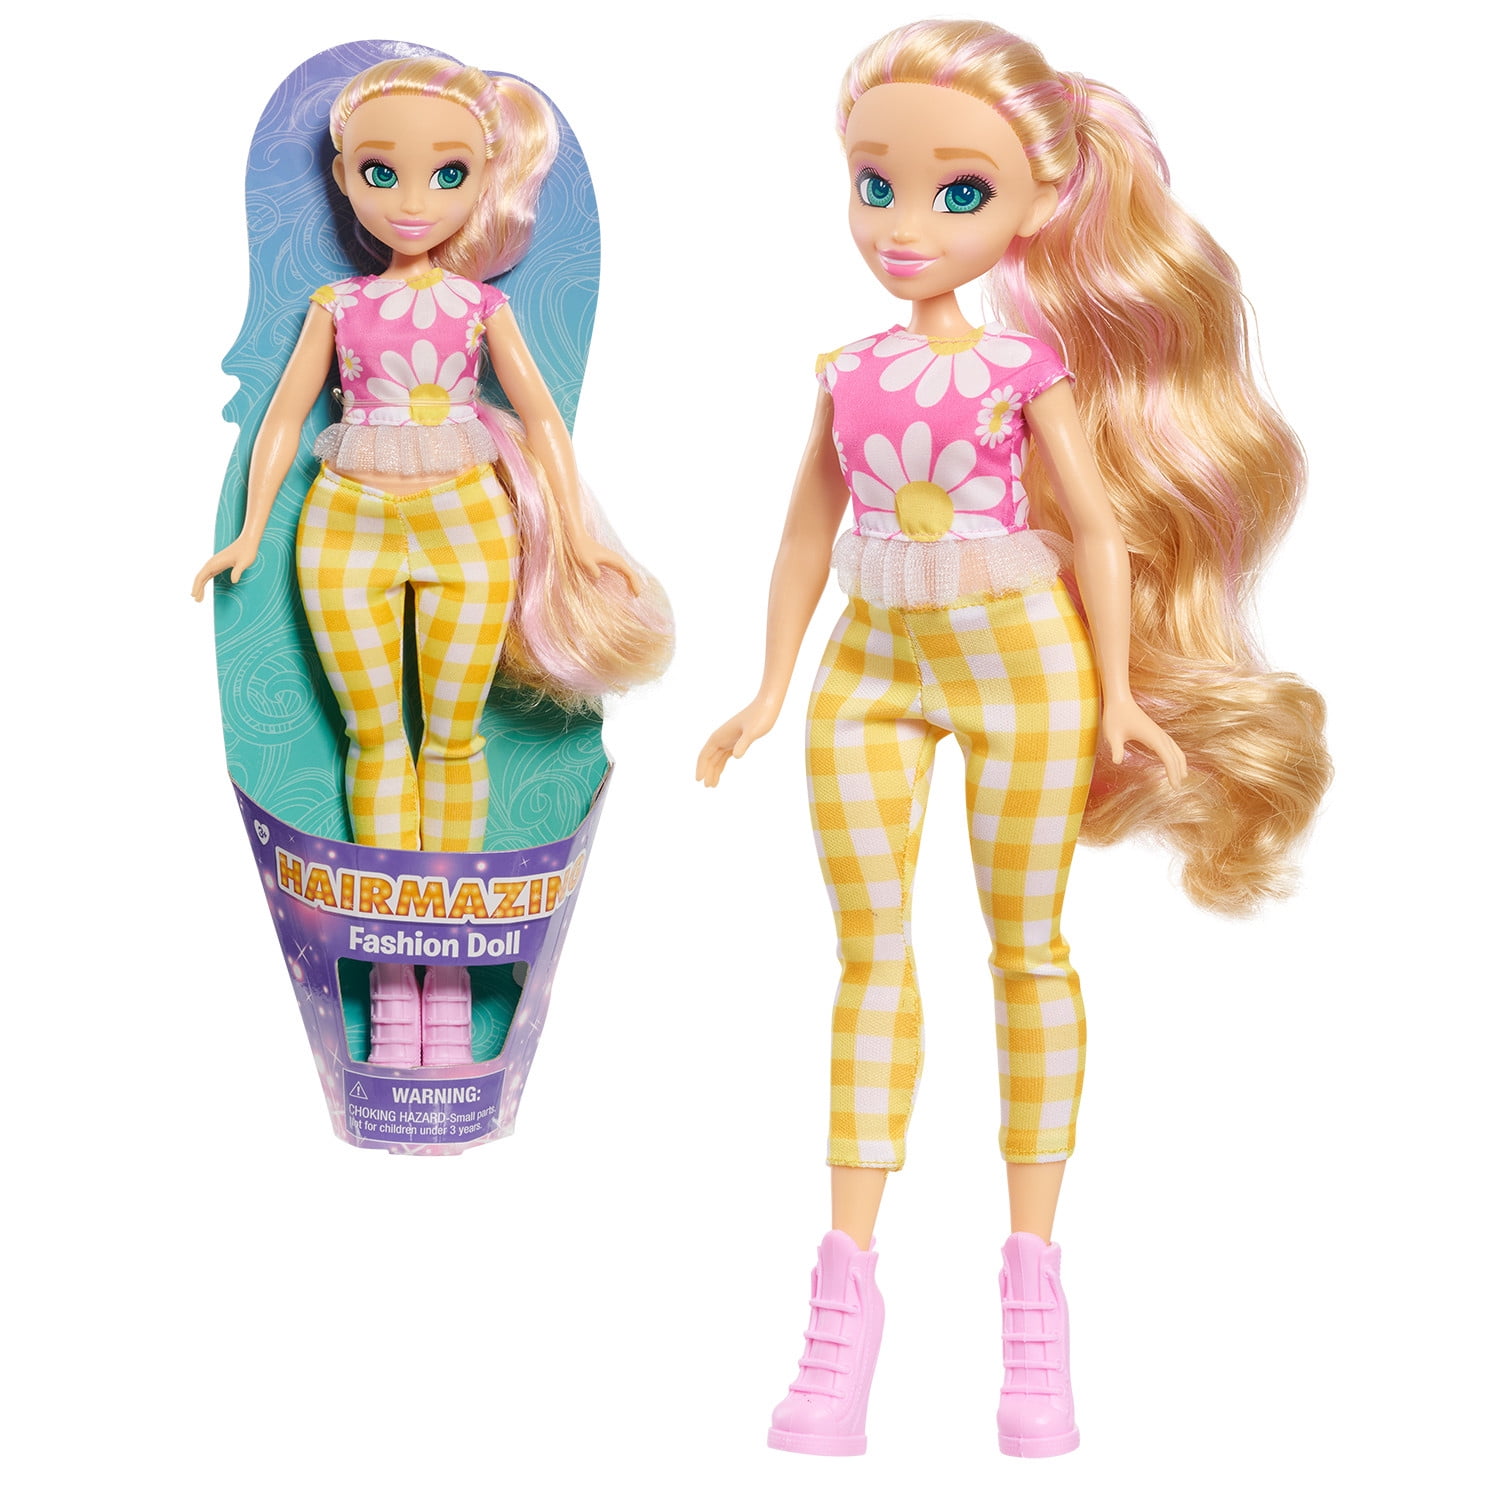 Hairmazing Fashion Forward Fashion Doll – Daisy Flower Top,  Kids Toys for Ages 3 Up, Gifts and Presents